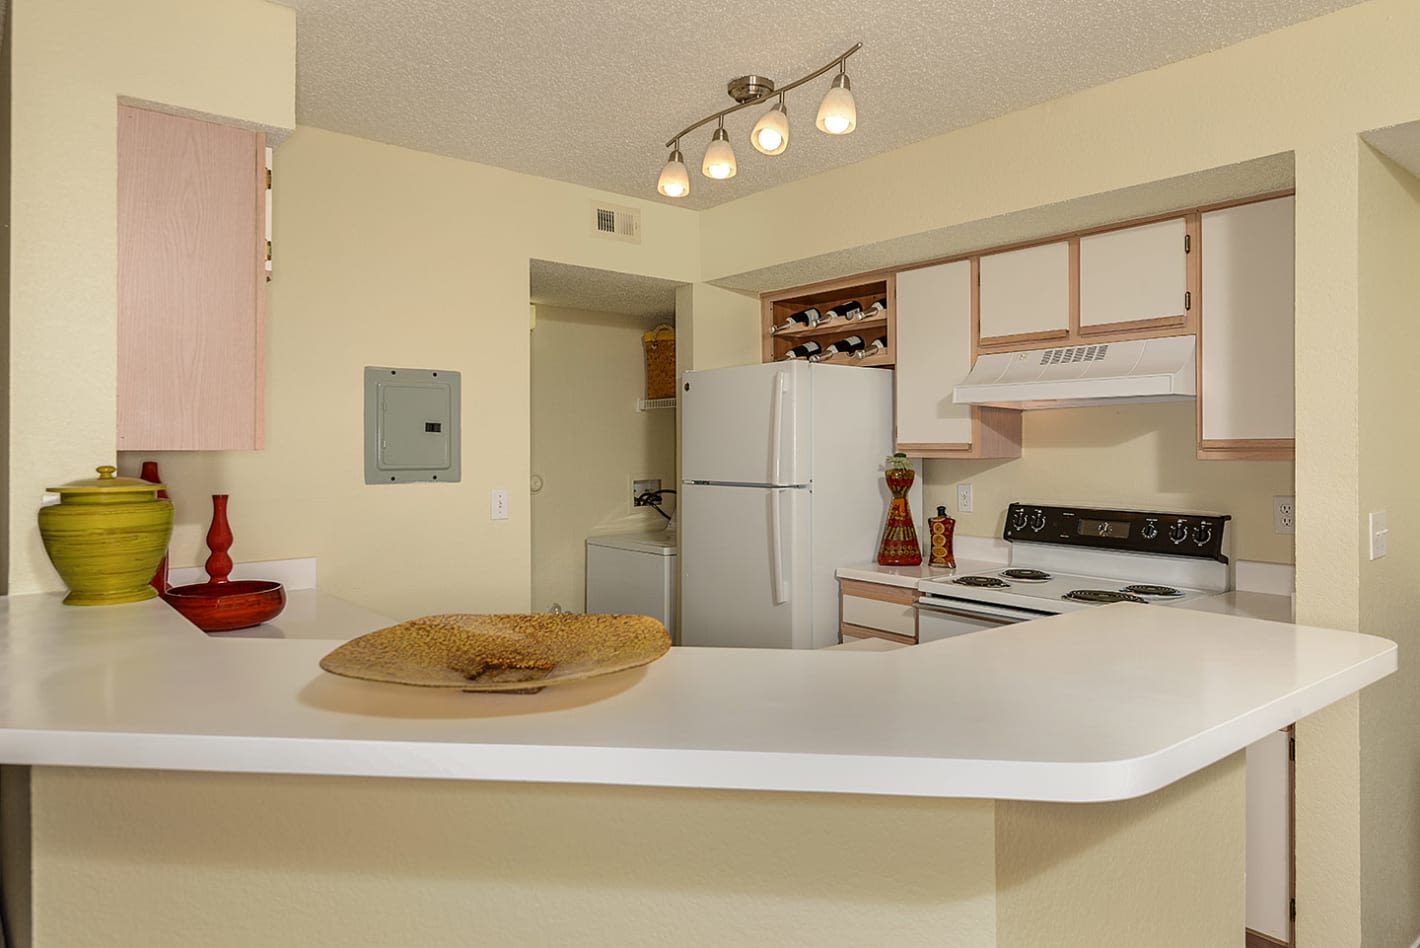 Fully Equipped Kitchen at Royal St. George at the Villages Apartment Homes in West Palm Beach, FL